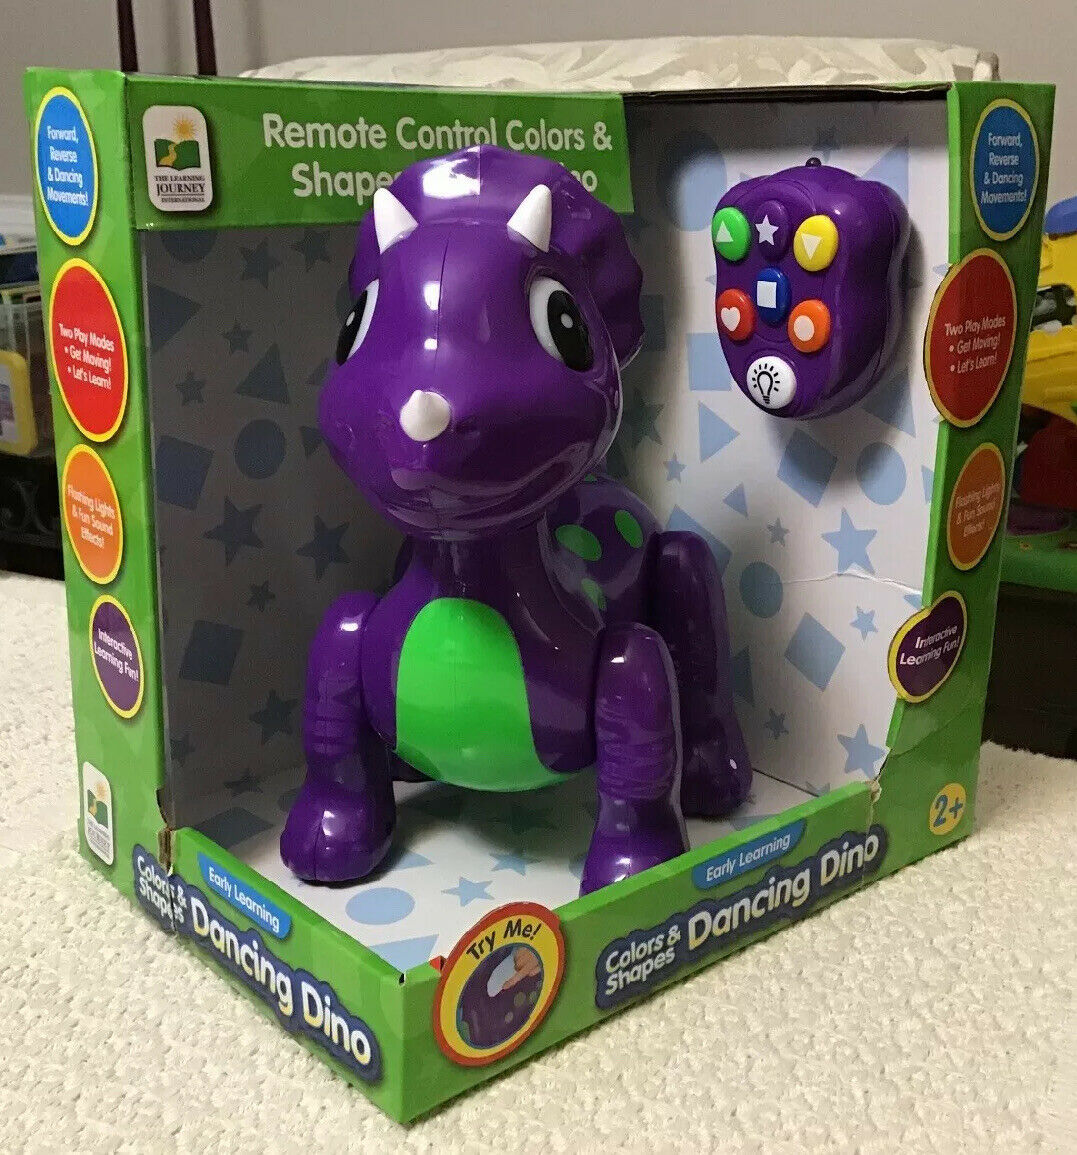 The Learning Journey Early Learning Colors & Shapes RC DANCING DINO - New in Box - $35.64